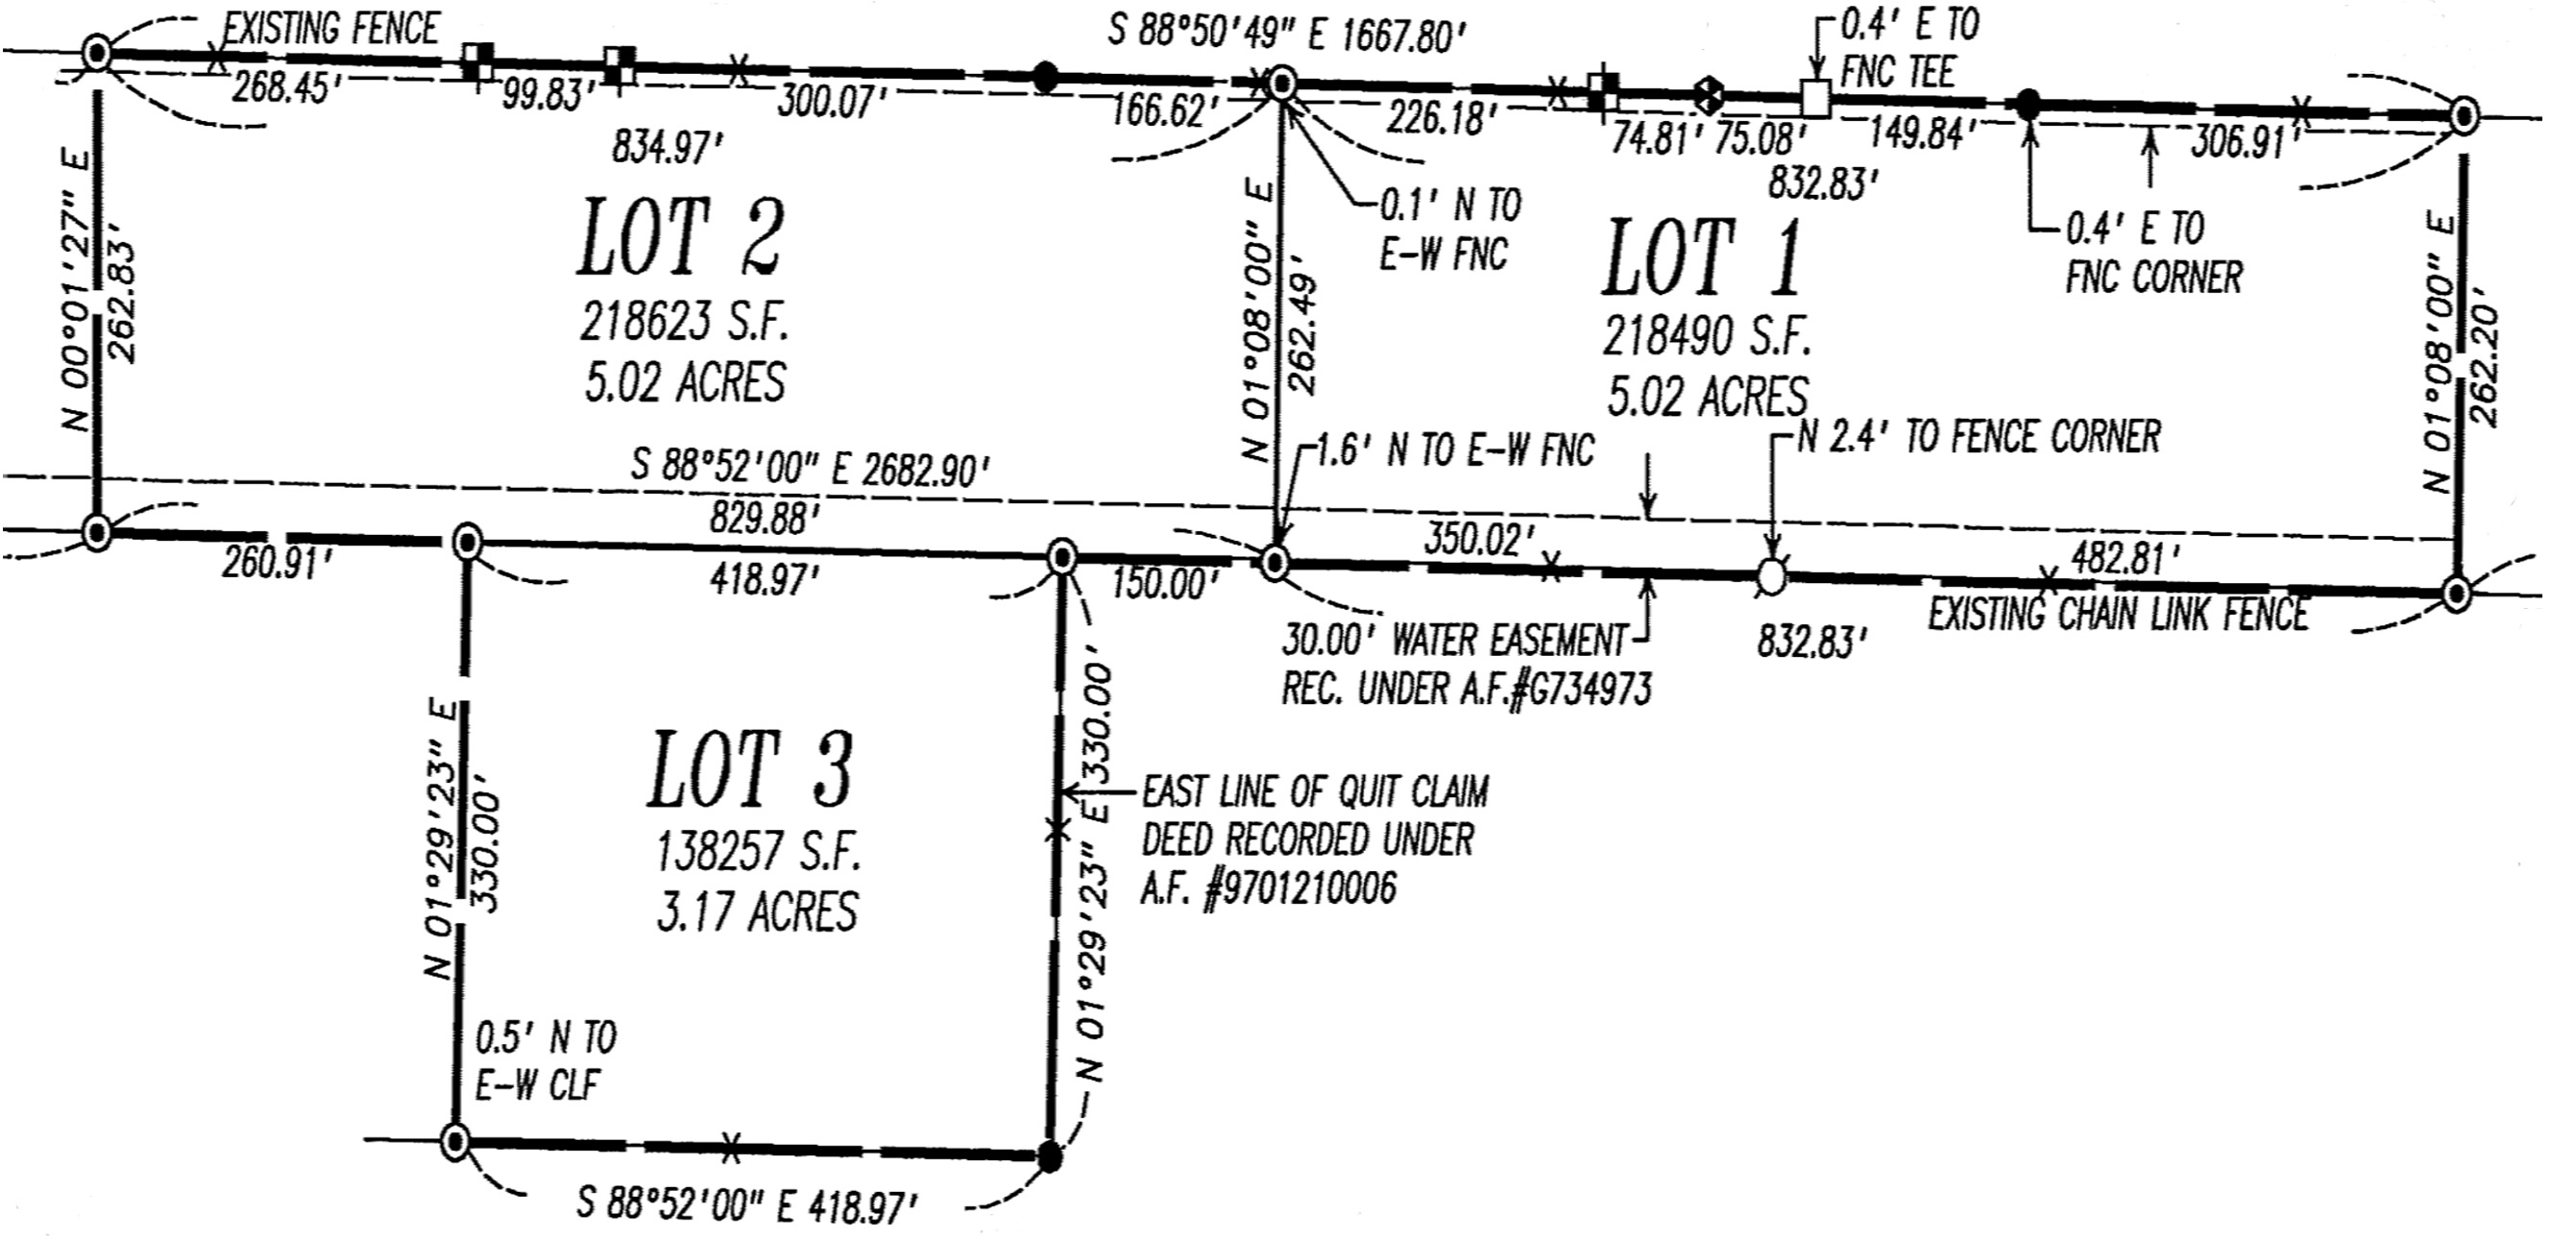 This is a small parcel map for the west parcel of Olin Business Park.